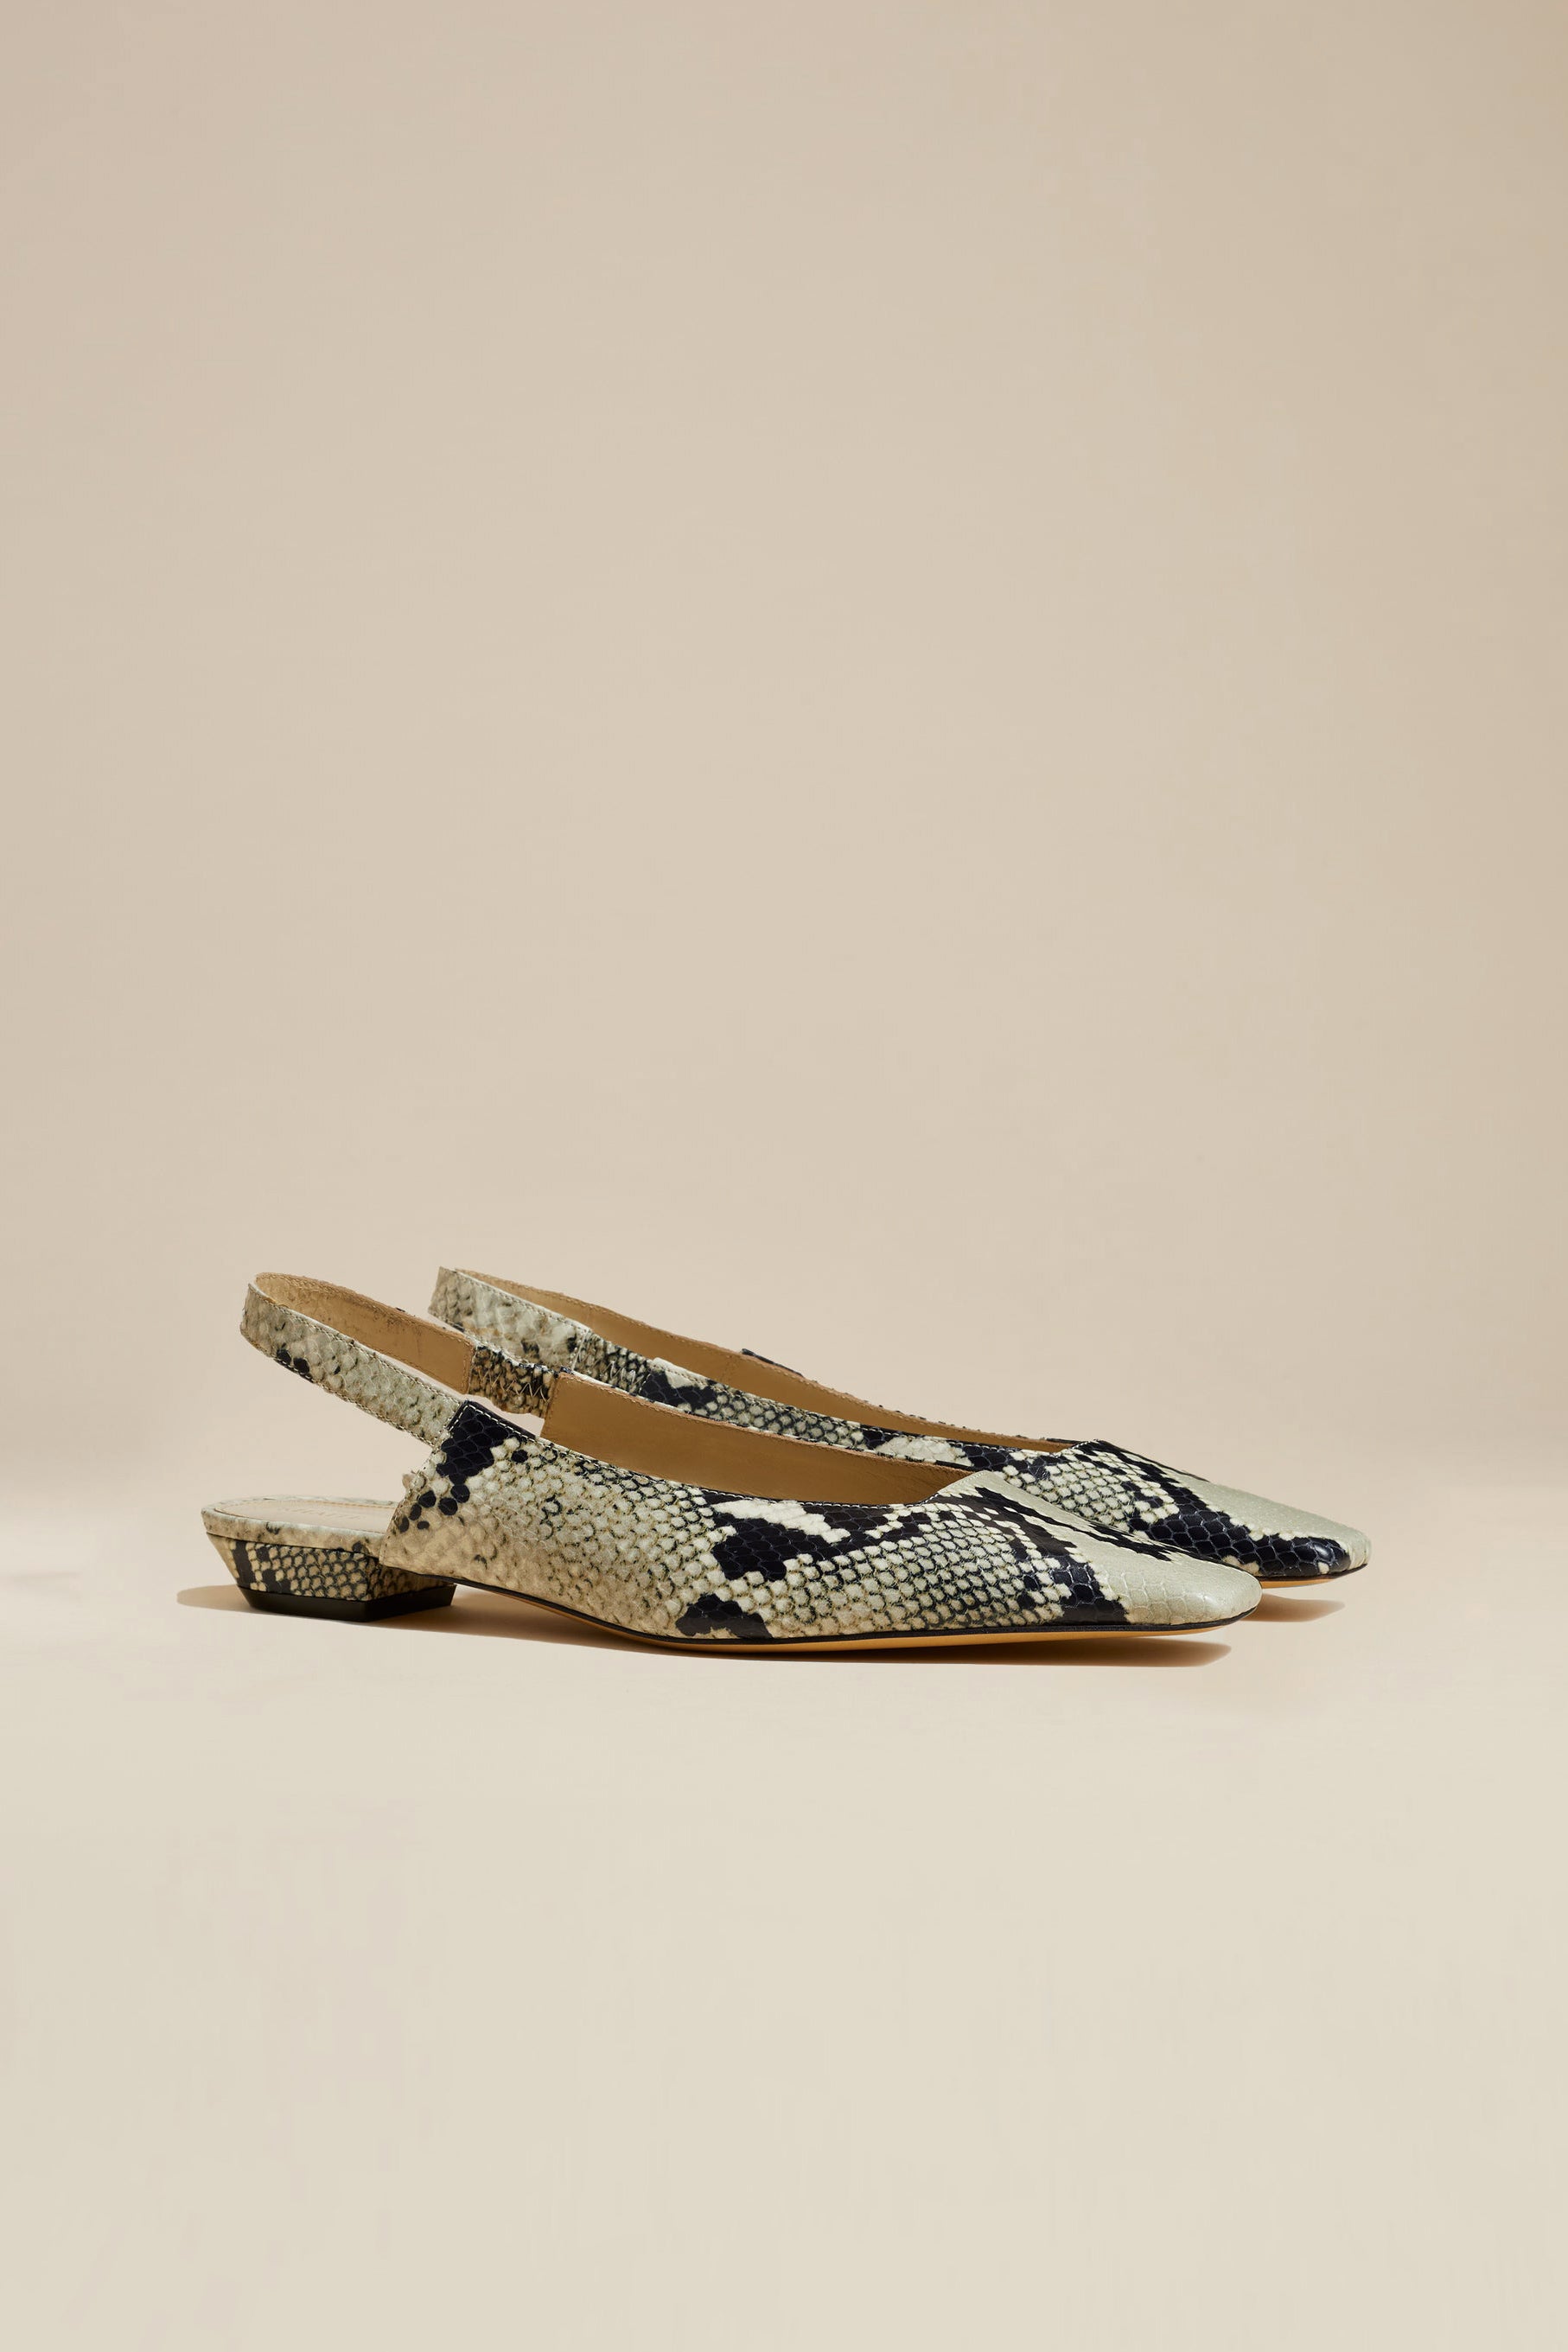 Loafer Colin in NaturalKhaite - Anita Hass